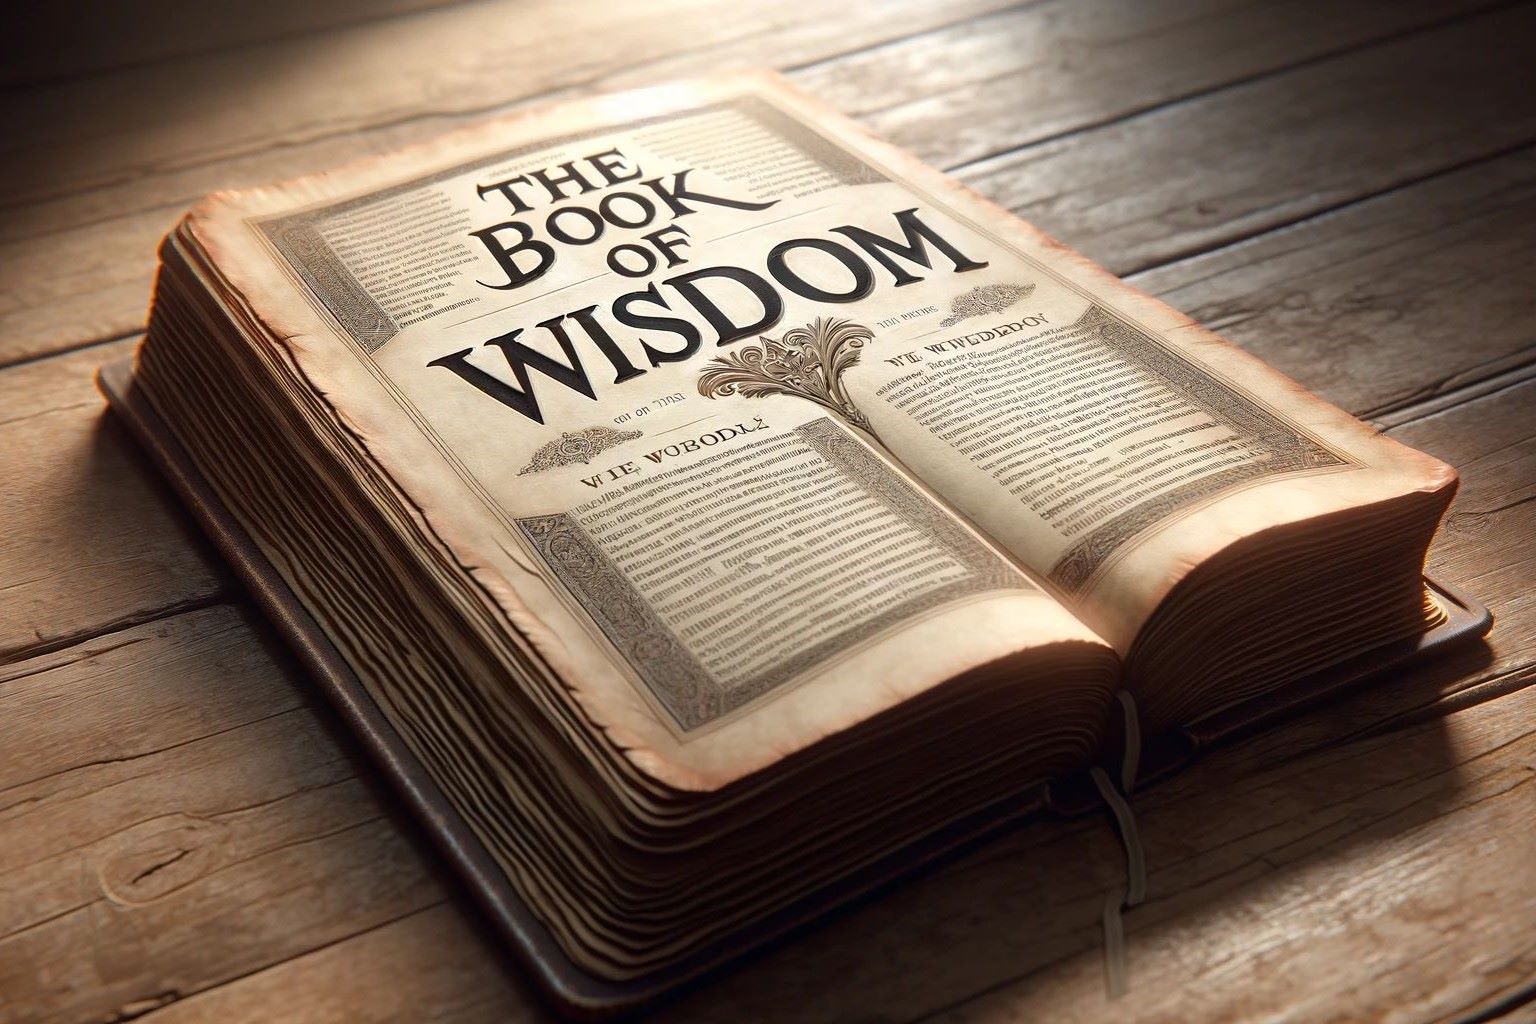 How Does The Book Of Wisdom Support The Concept Of Natural Revelation